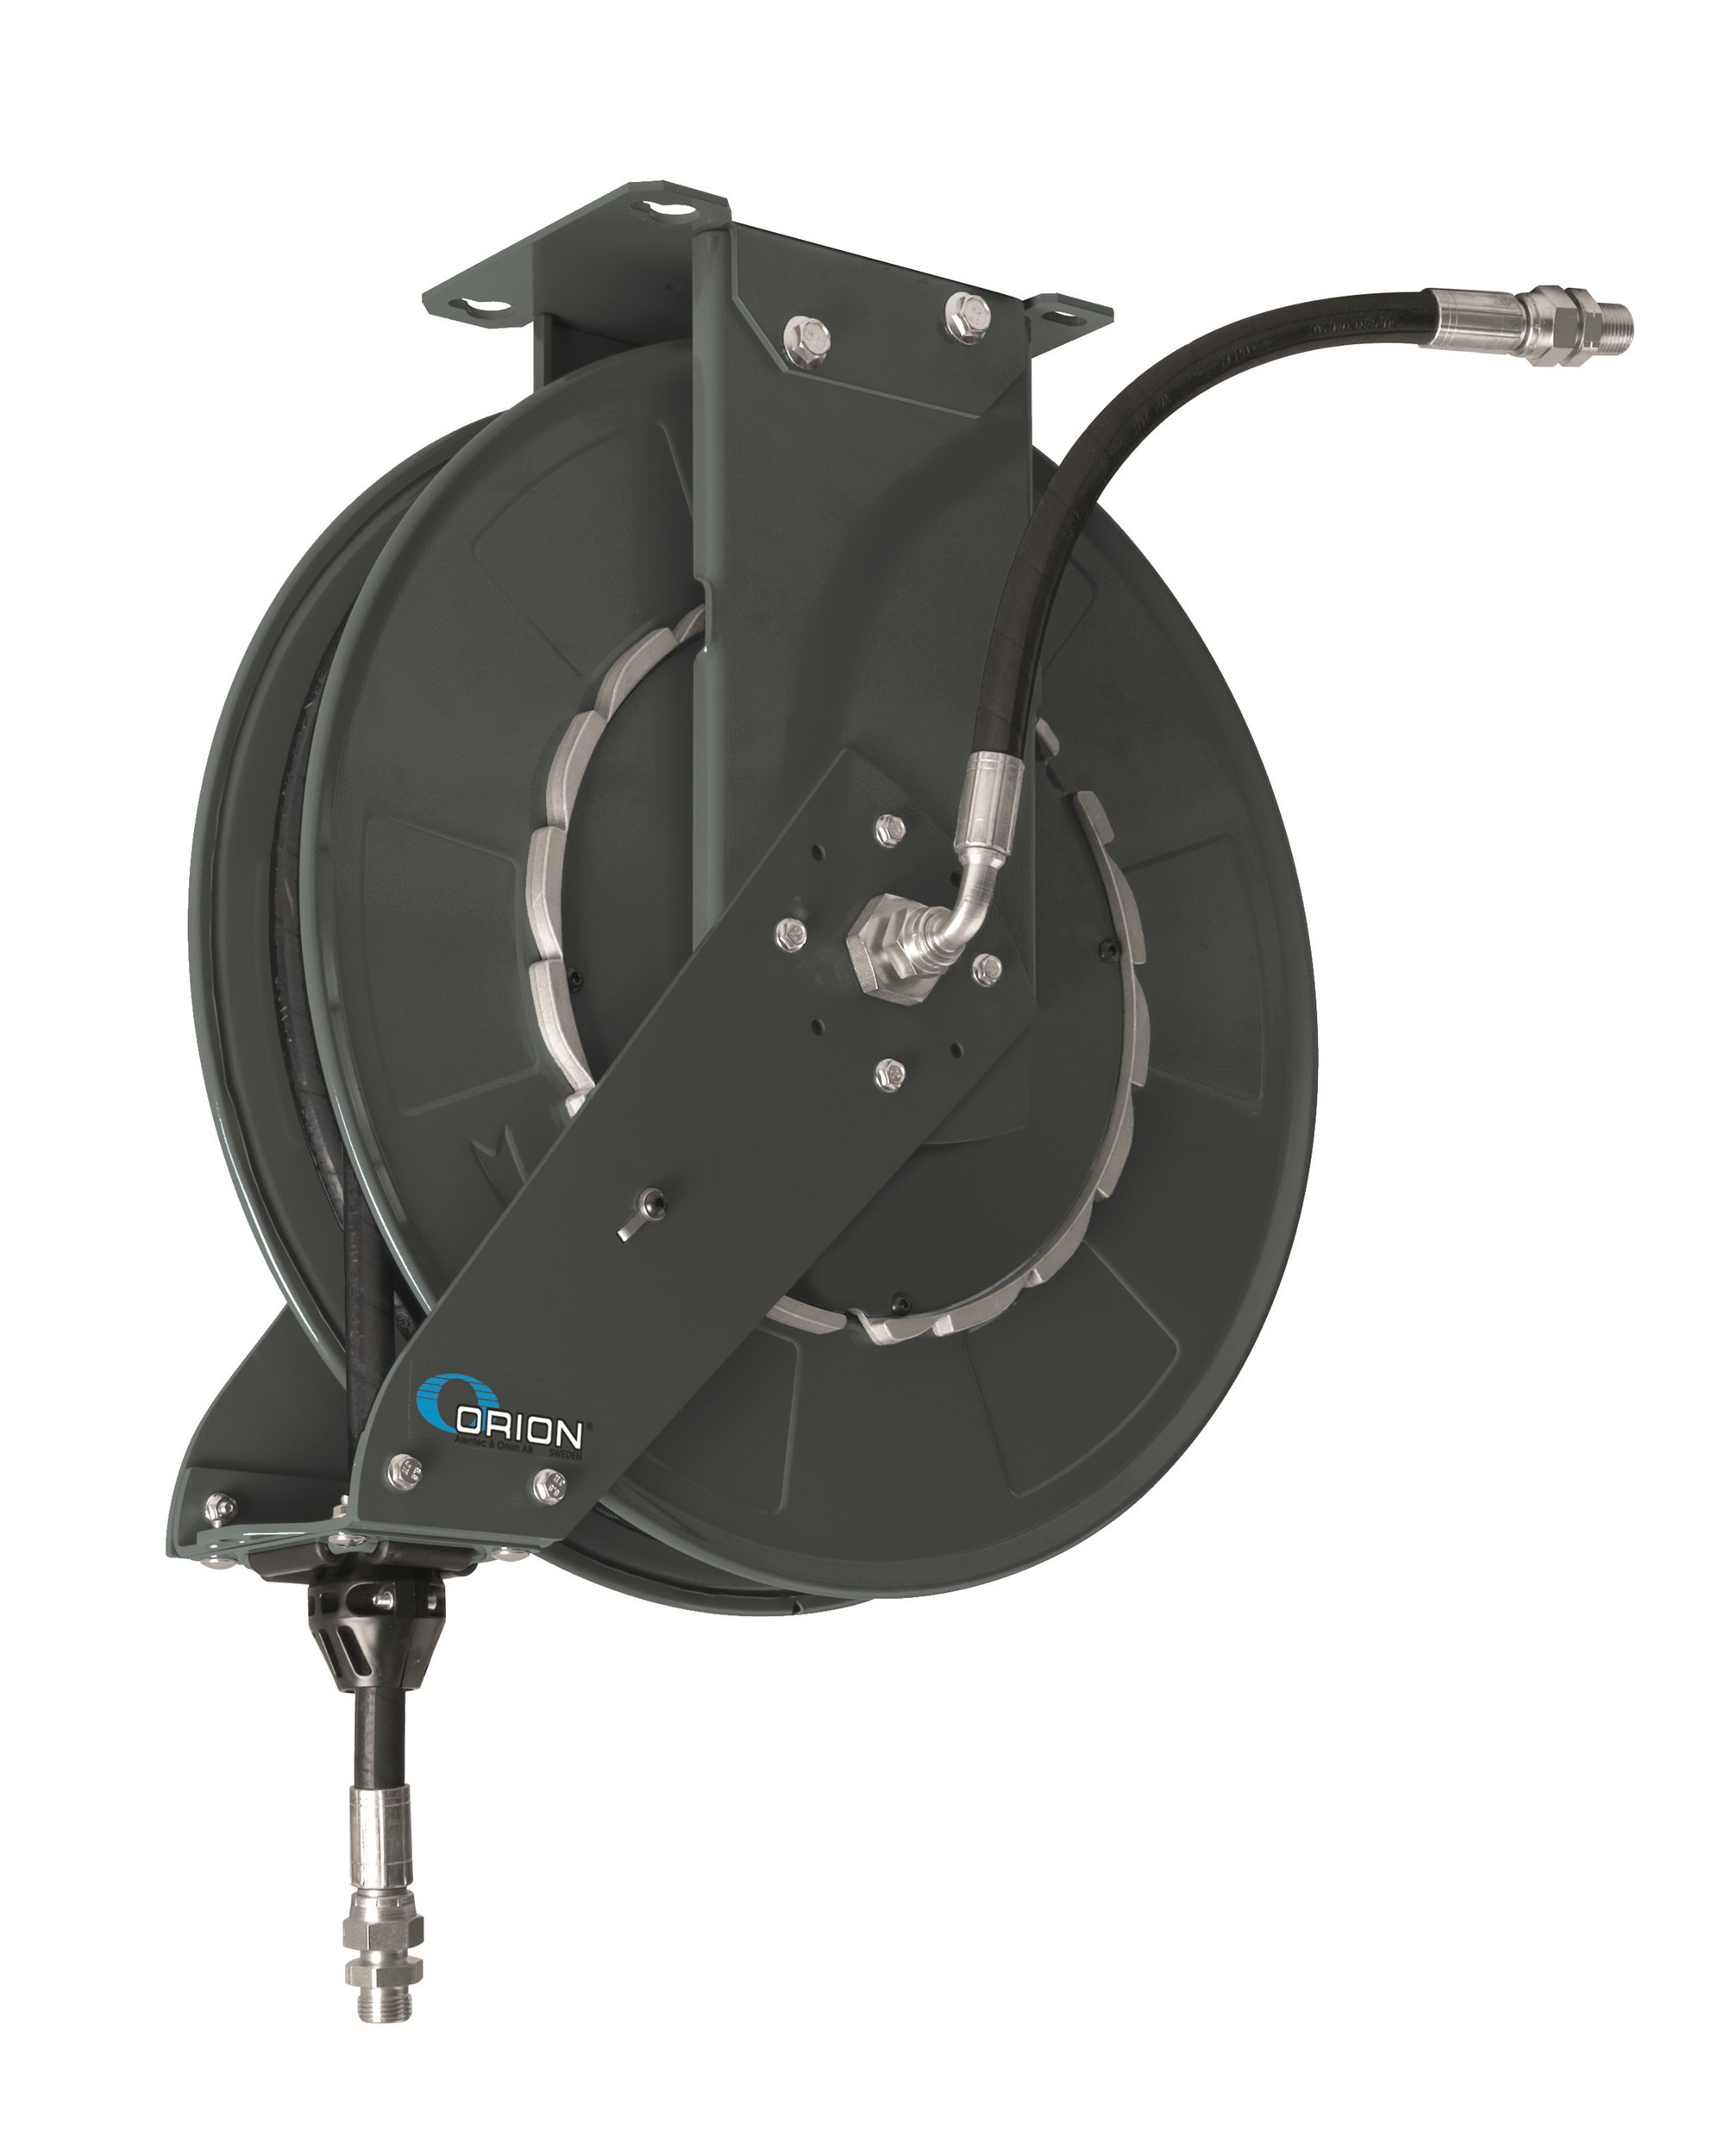 Hose Reel ORM Air/Water 12,5 (1/2) mm (inch) 15 m - Alentec & Orion AB